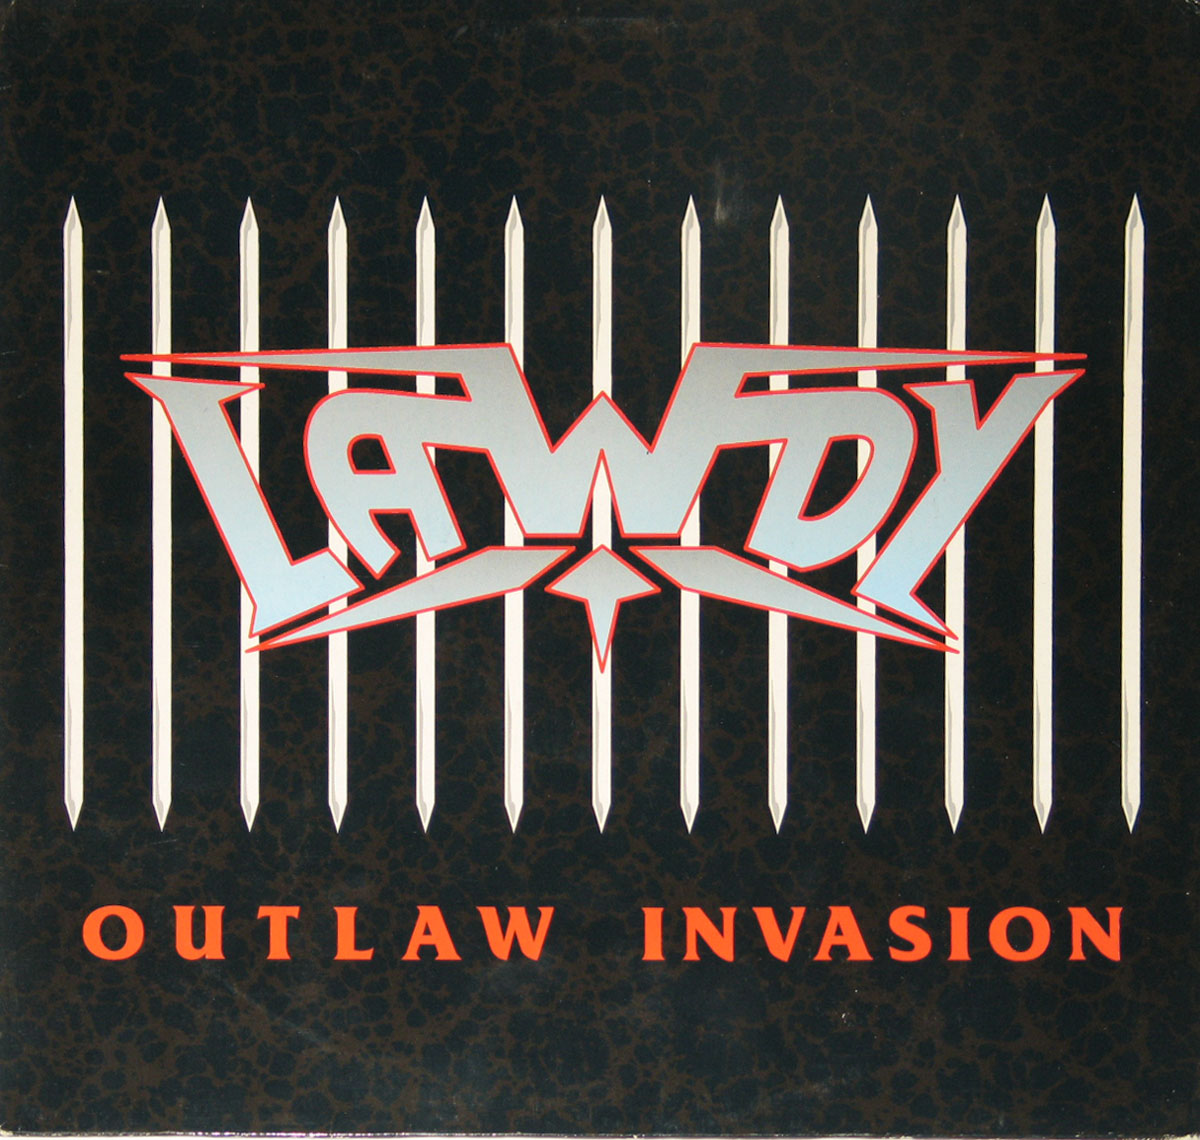 High Resolution Photo Lawdy Outlaw Invasion 